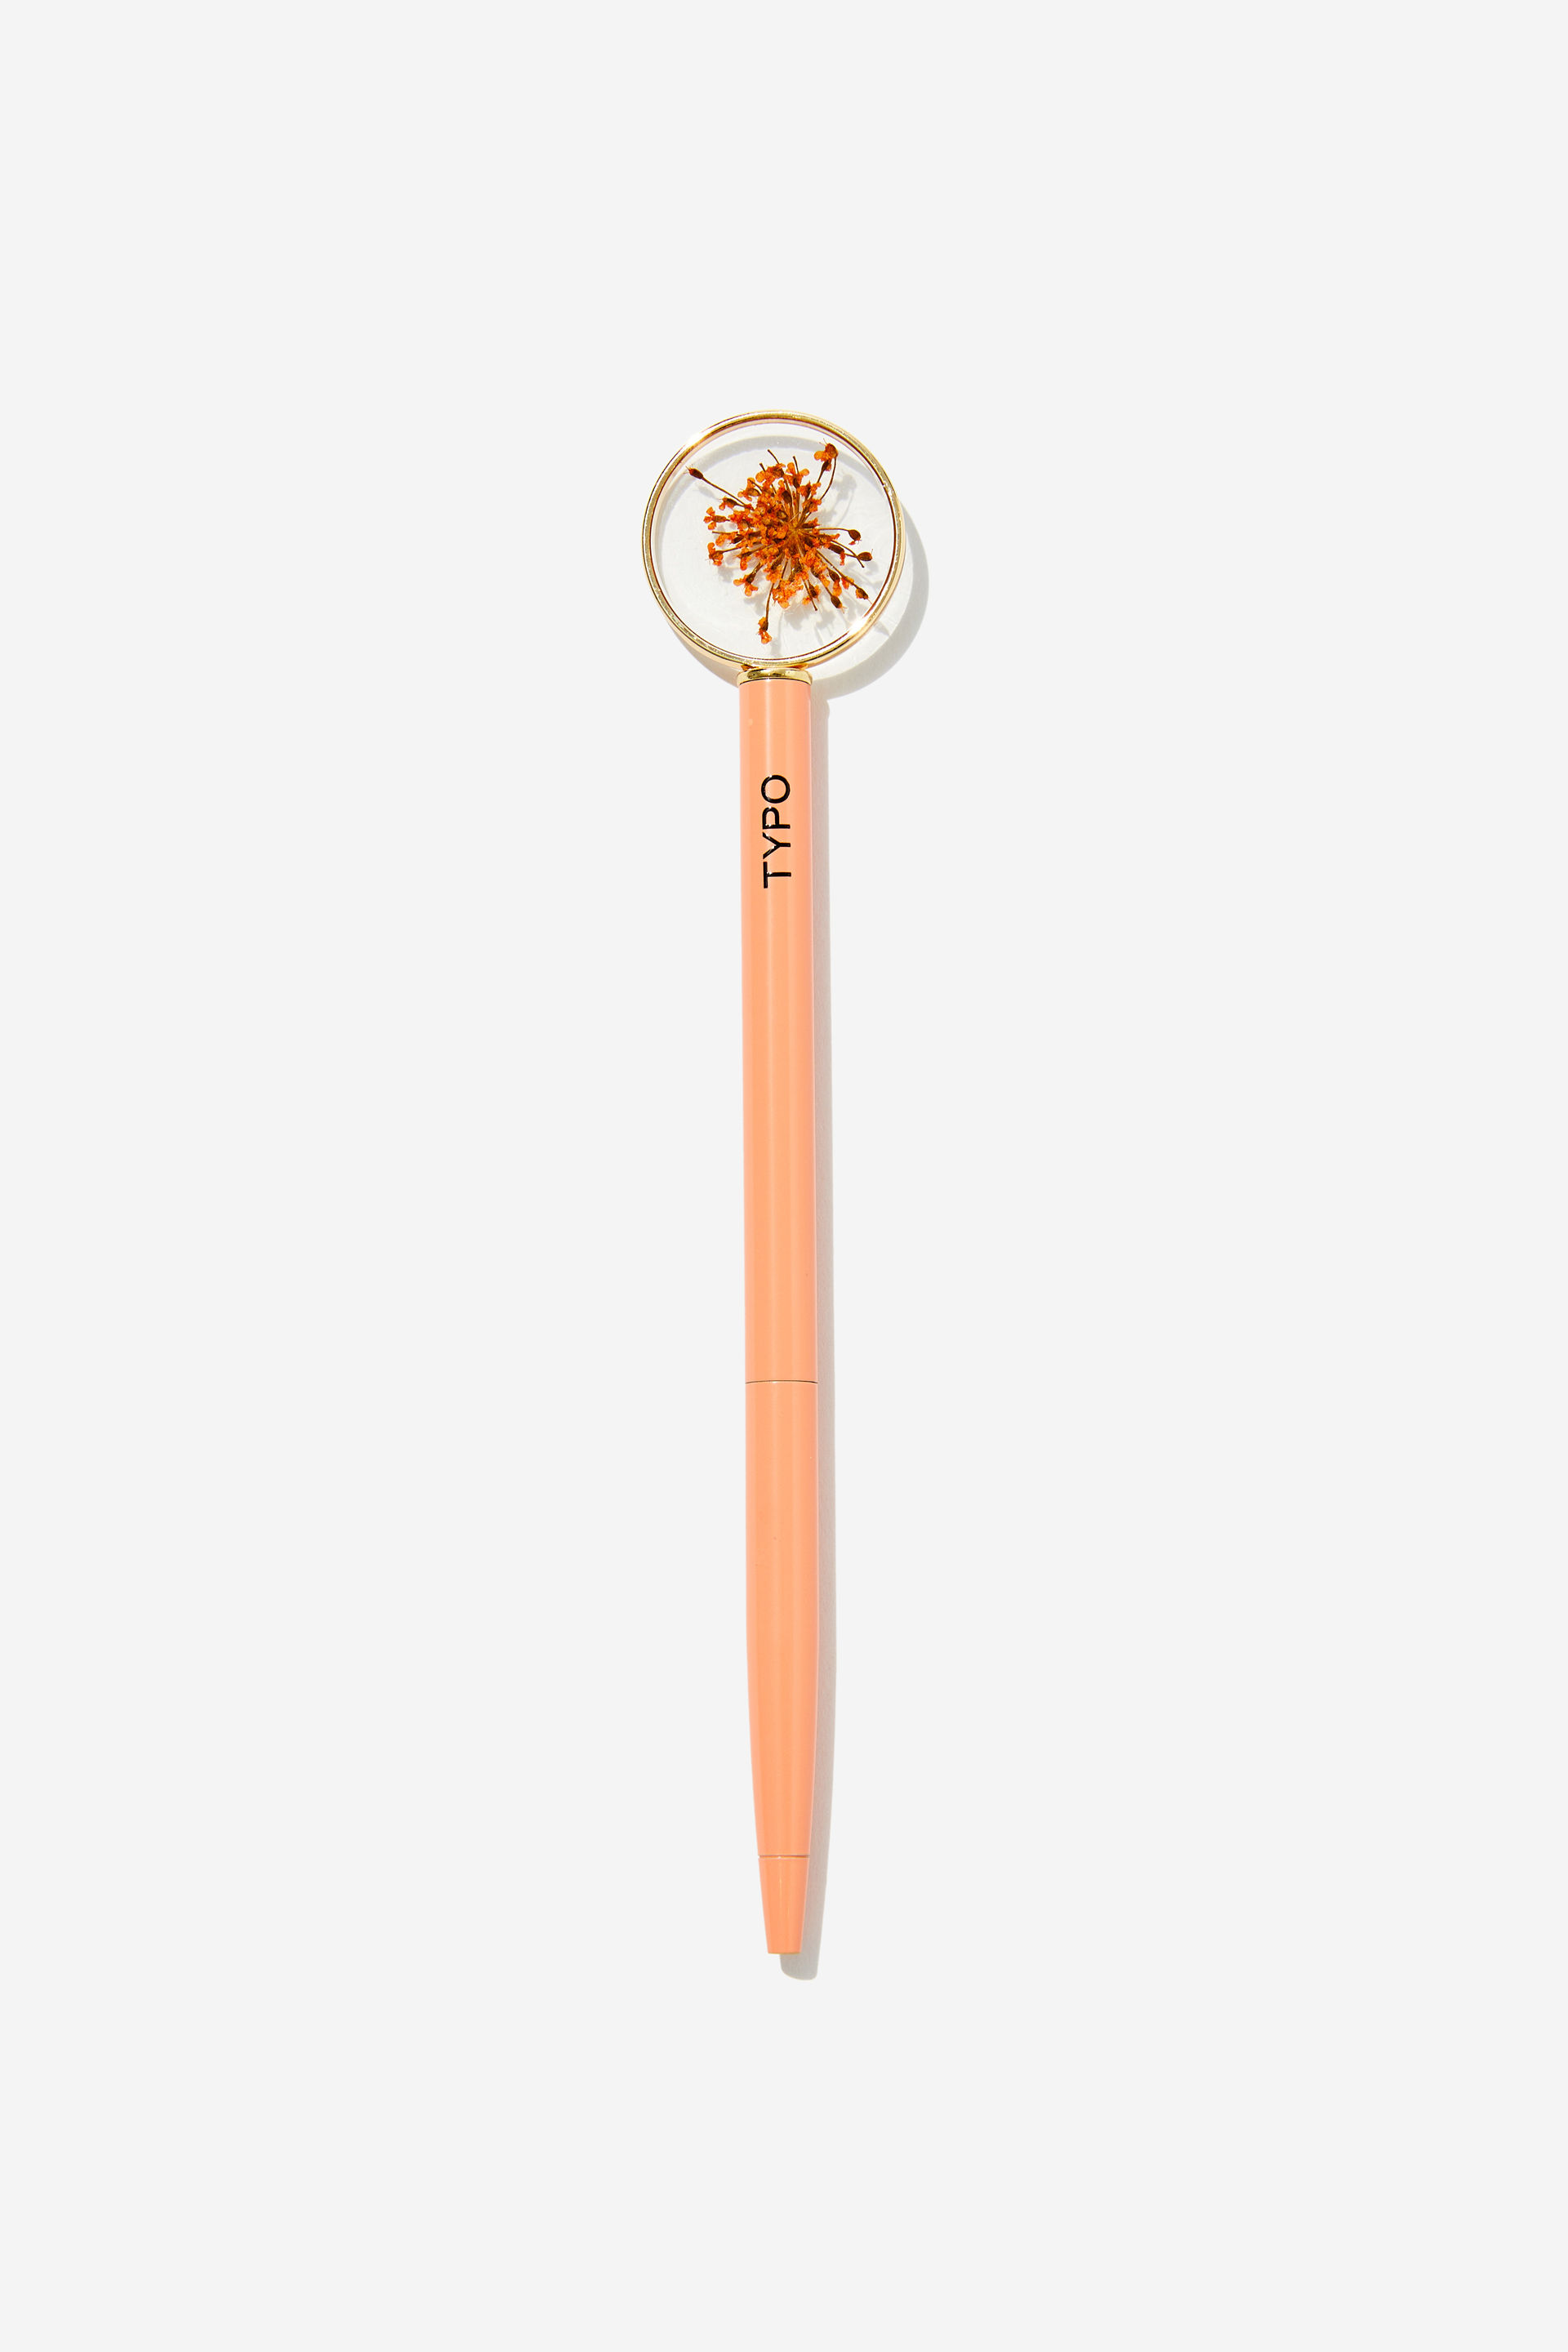 Typo - Trapped Flower Pen - Apricot crush